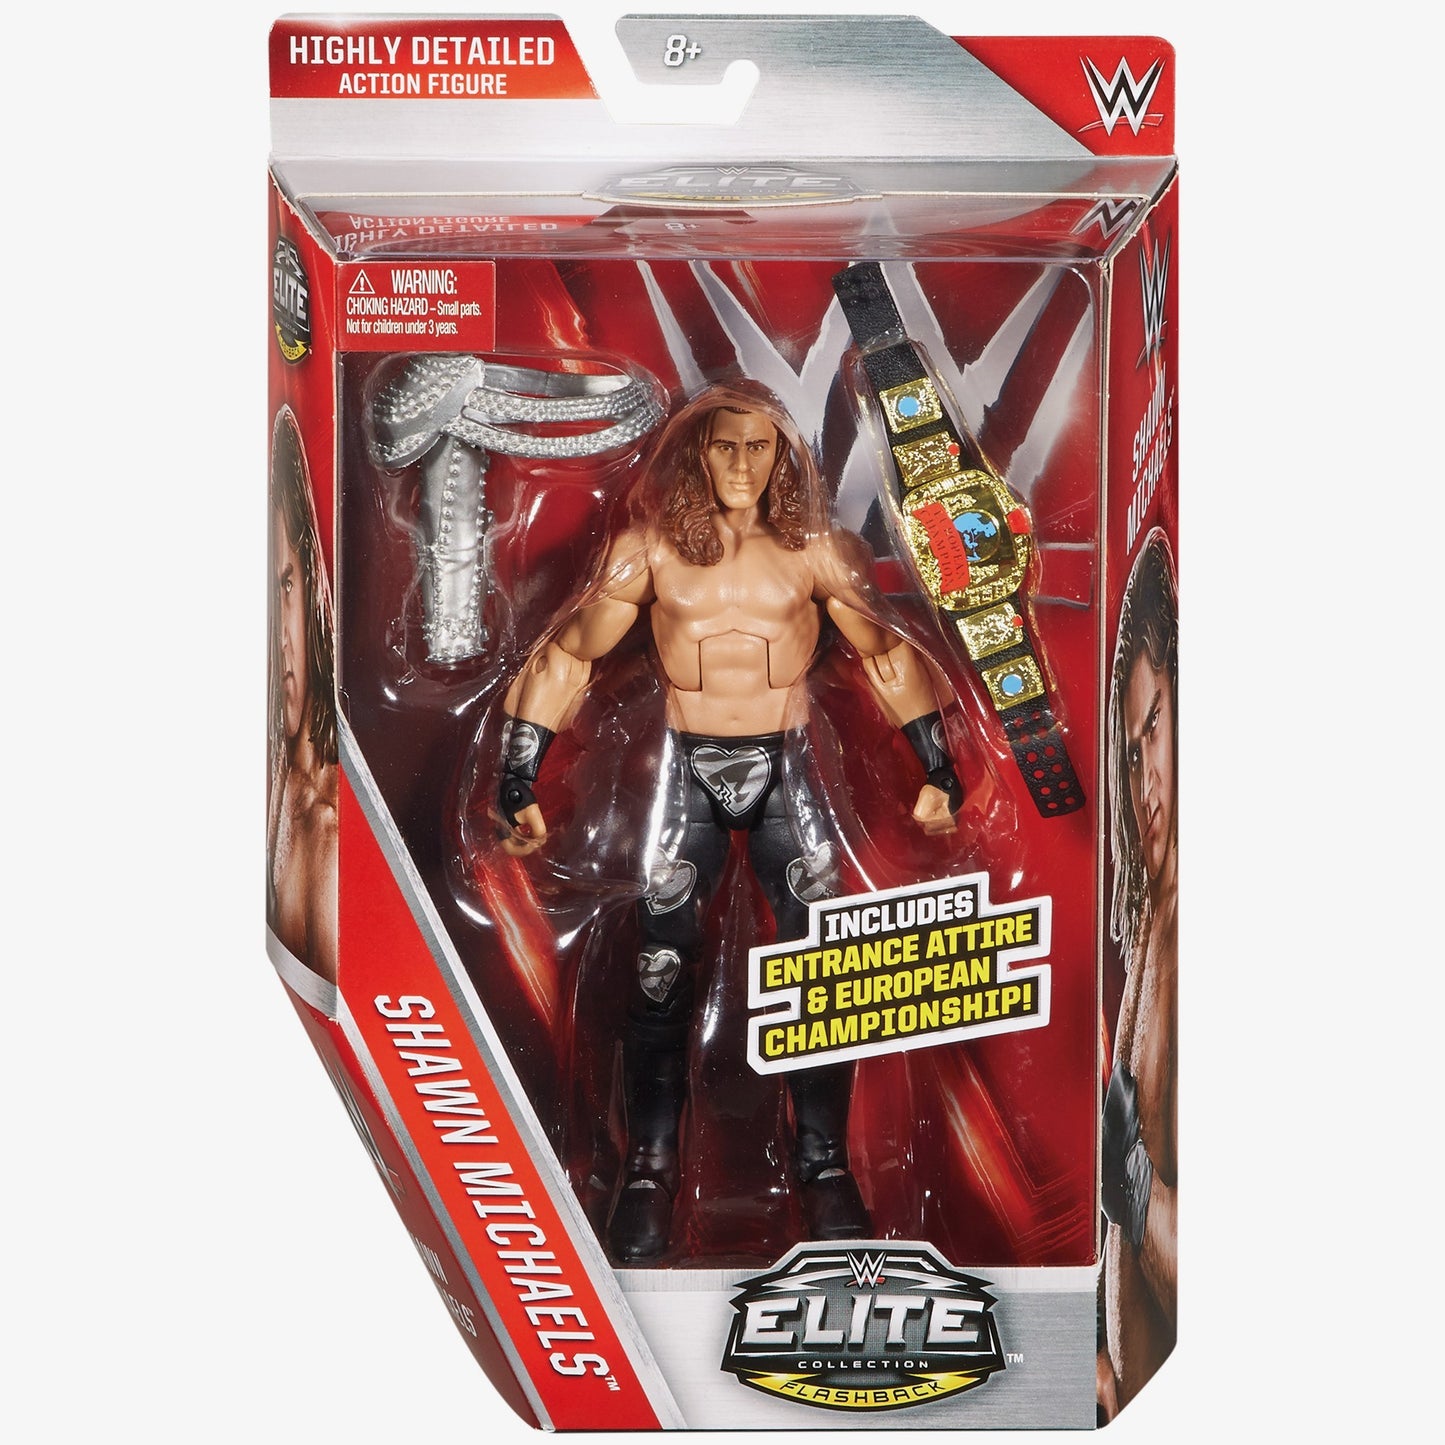 Shawn Michaels - Lost Legends - WWE Elite Collection Series